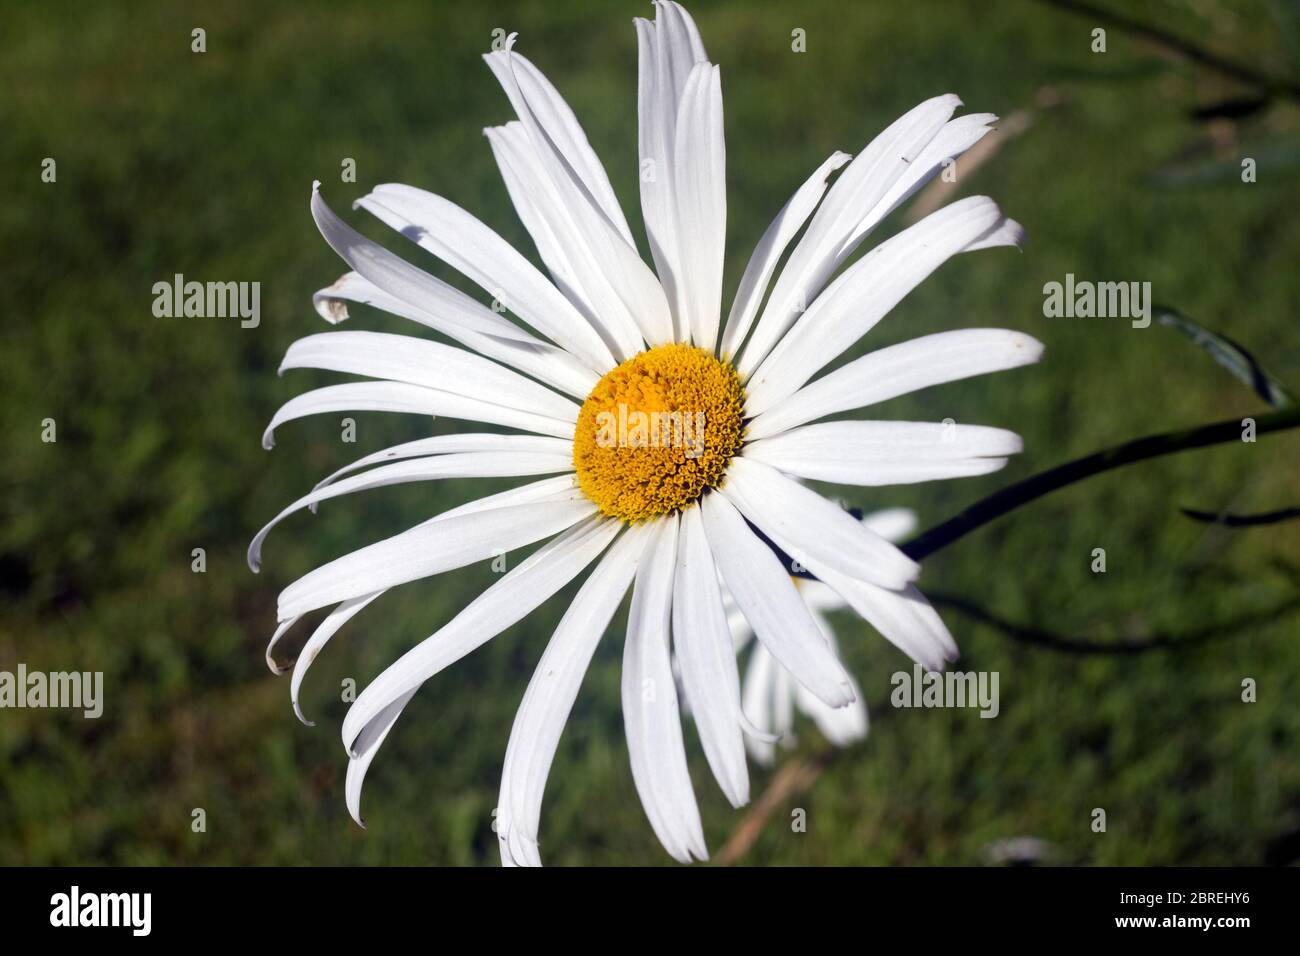 Close up image of a Boltonia Asteroides Stock Photo